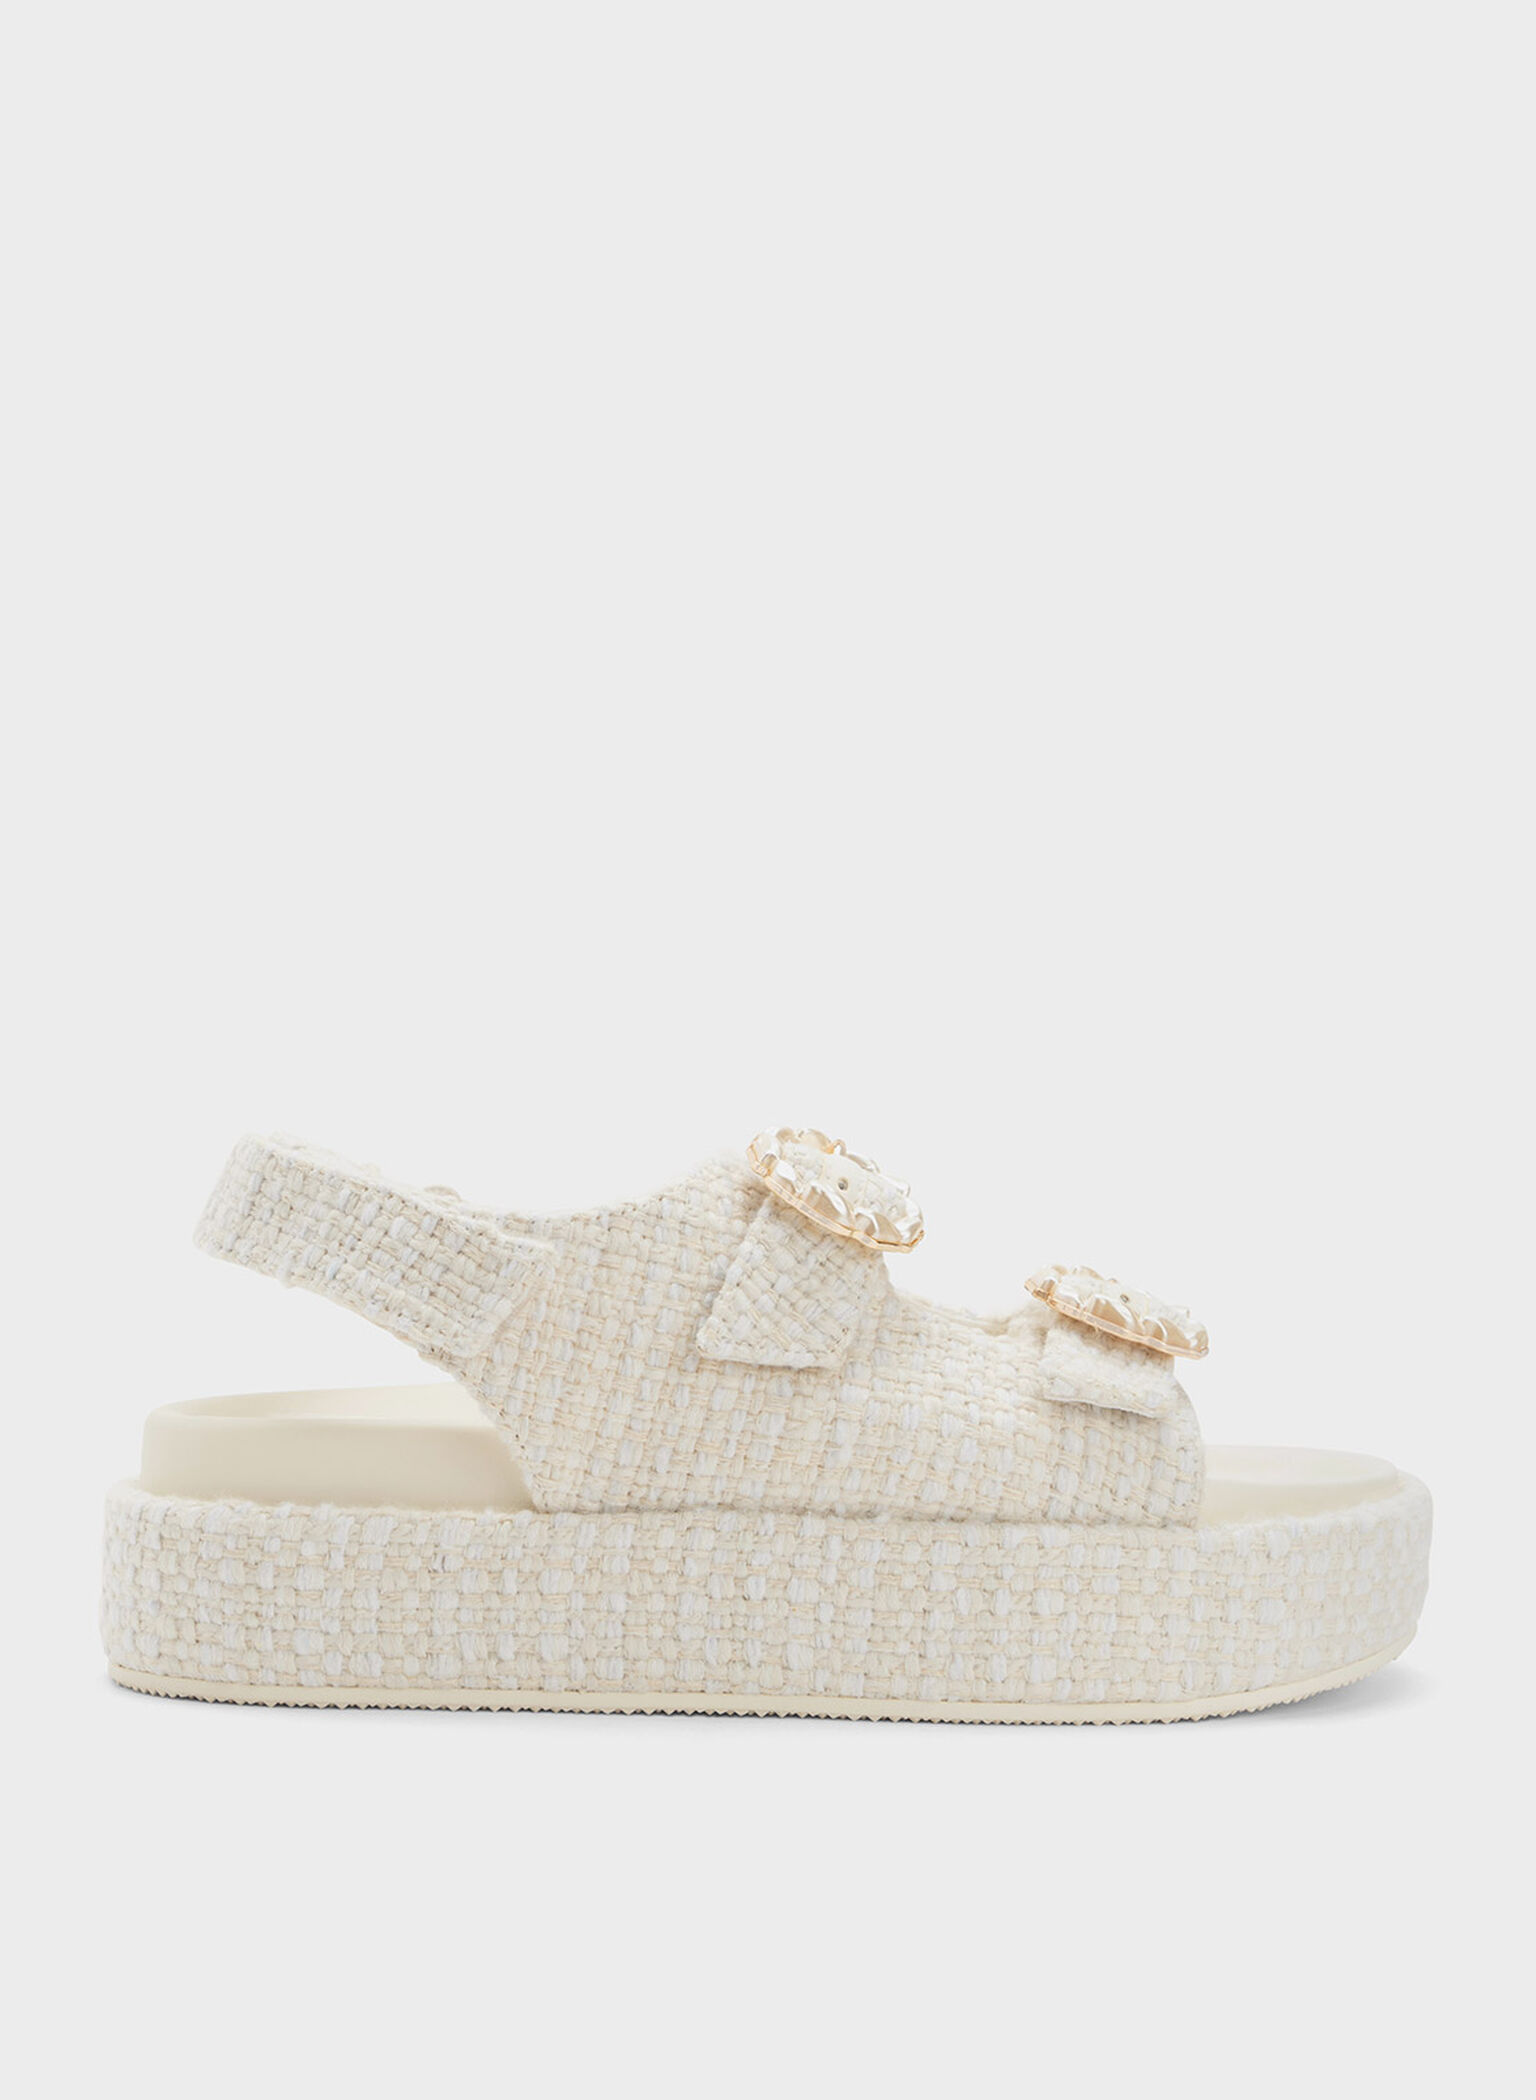 Chalk Tweed Pearl-Buckle Double Strap Sandals - CHARLES & KEITH US